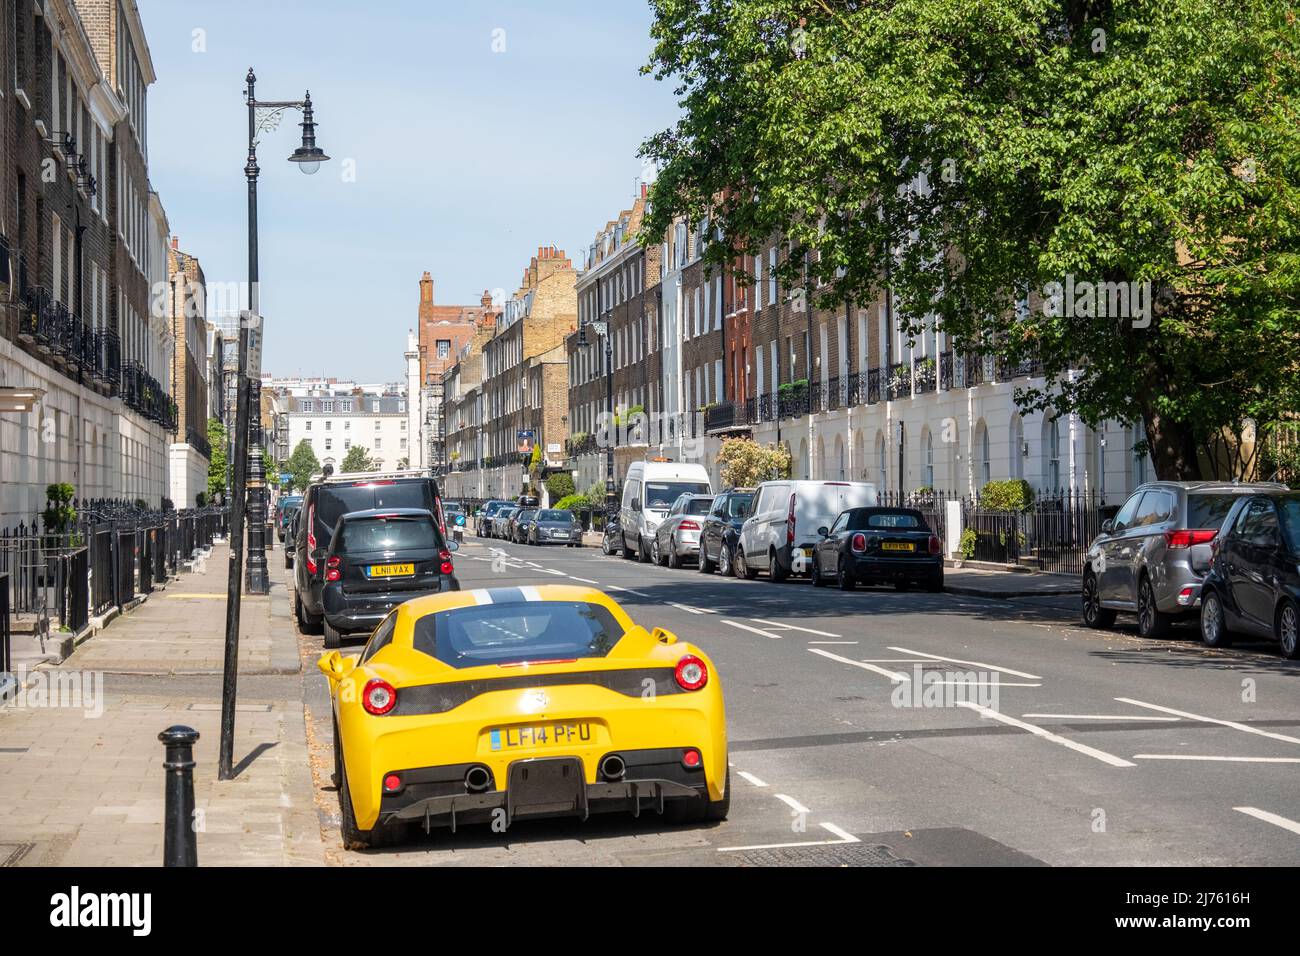 London- May 2022: A yellow Ferrari parked outside attractive townhouses in Knightsbridge, an affluent area of London. Stock Photo